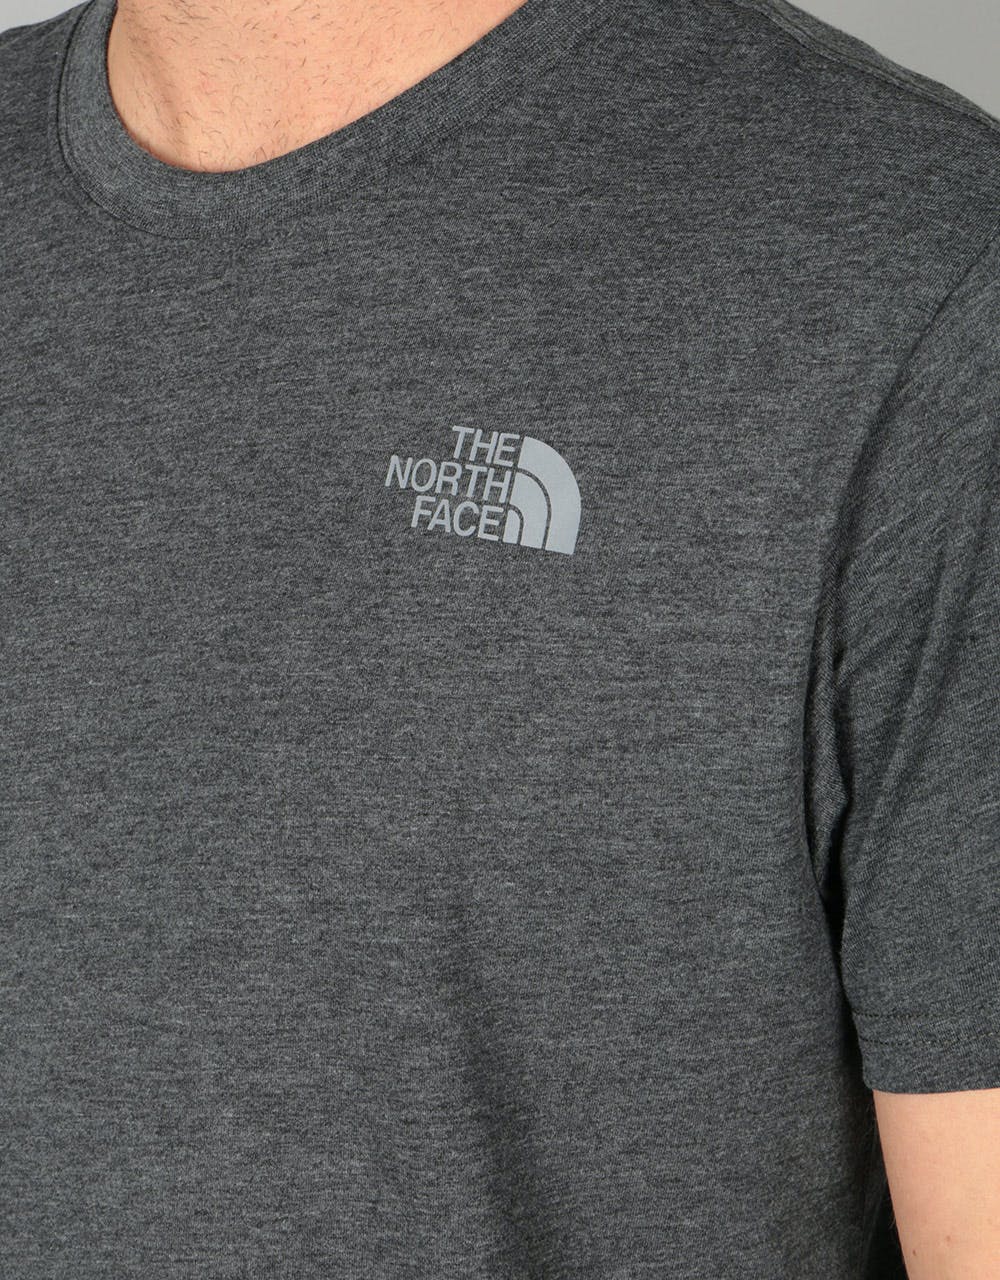 The North Face S/S Red Box T-Shirt - Dk Grey Heather/Silver Reflective